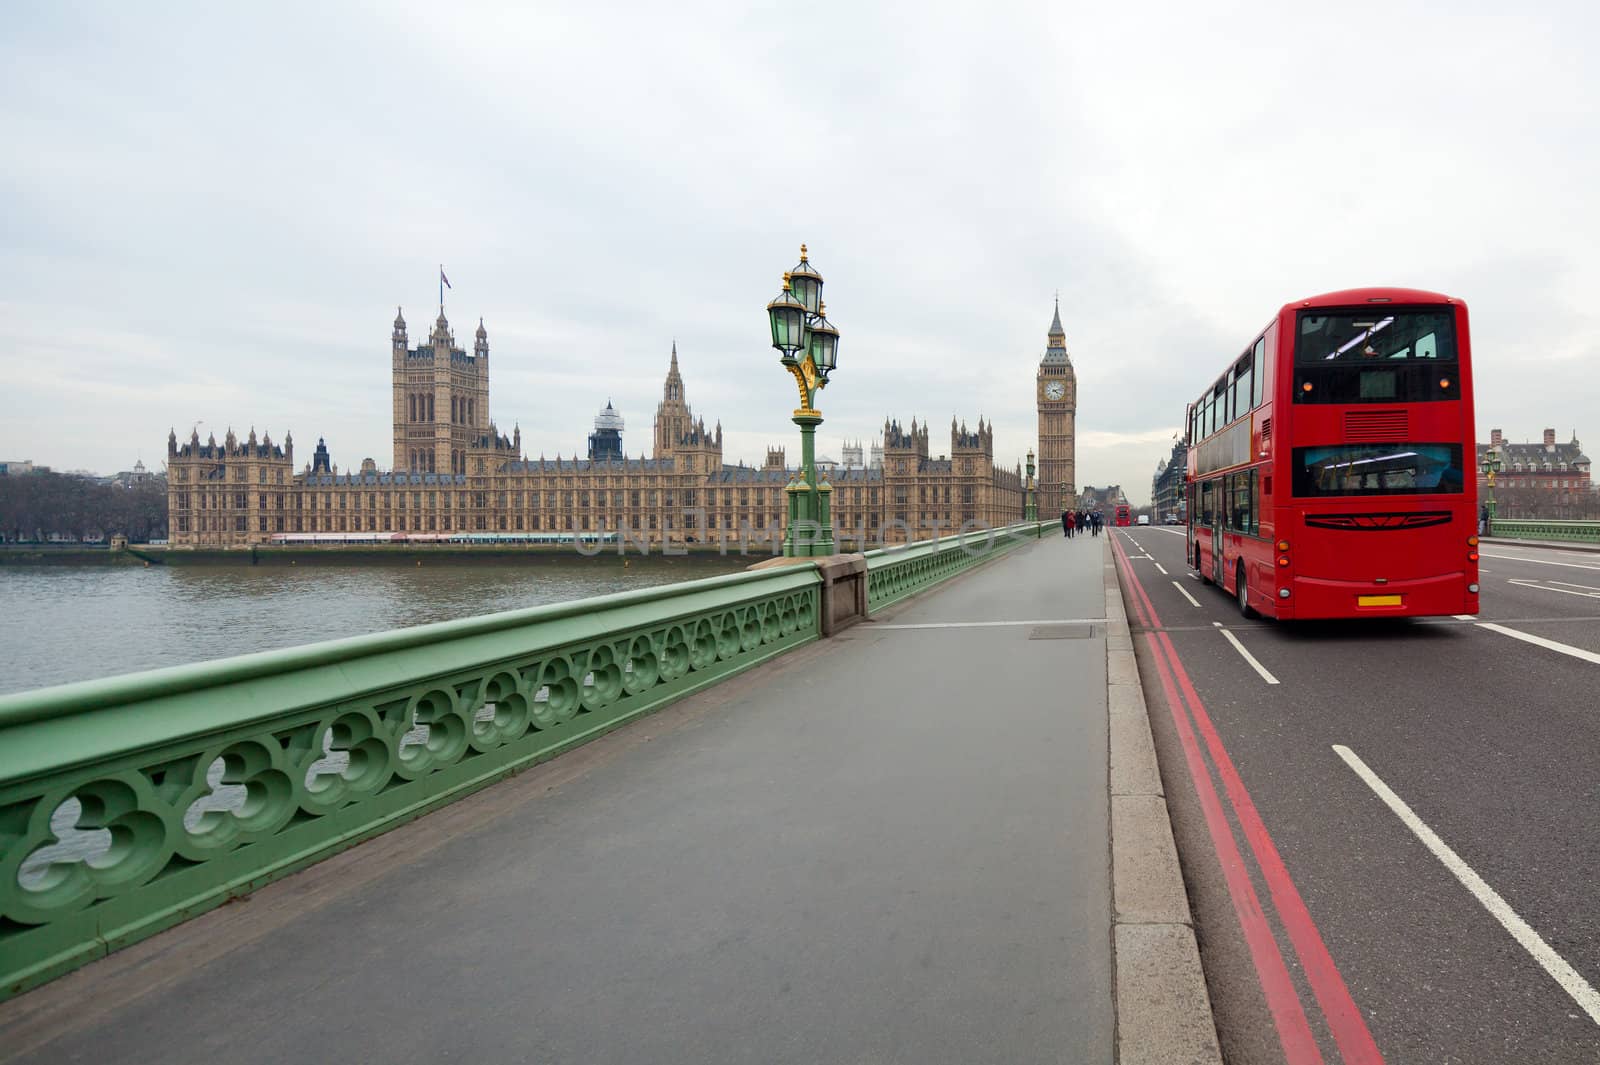 Westminster Bridge with views of the British Parliament and Big Ben. London red double decker bus passes nearby